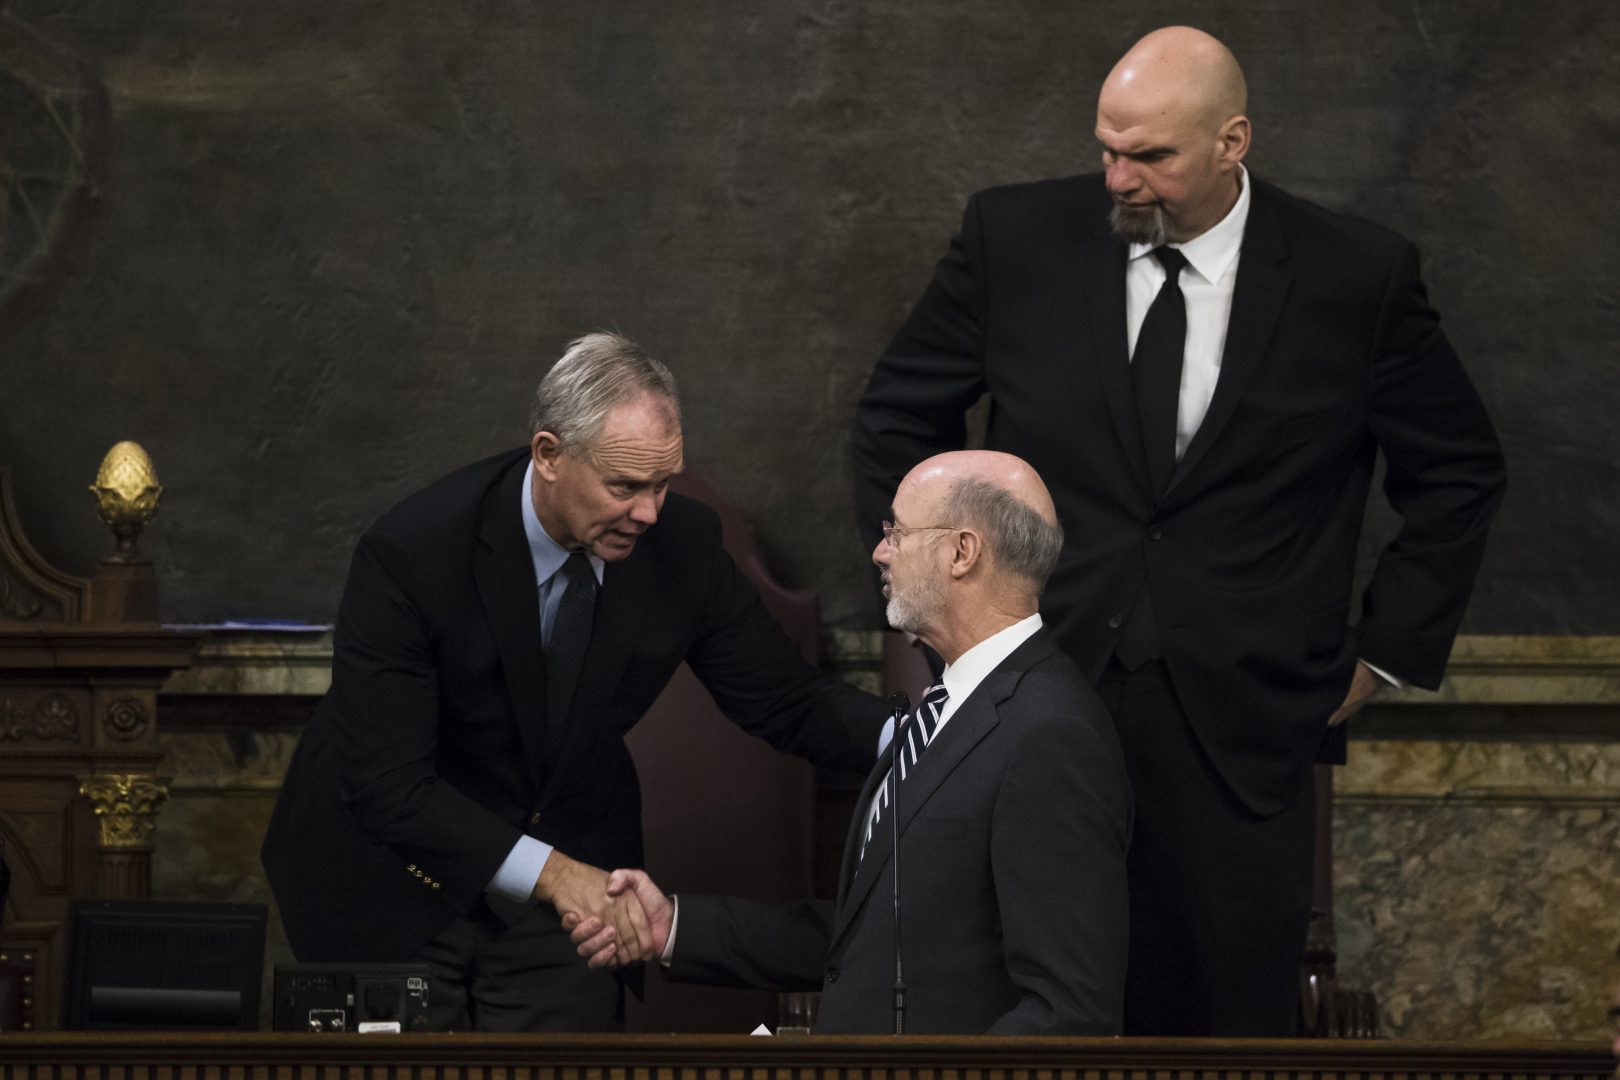 Democratic Gov. Tom Wolf, center, shakes hands with House Speaker Mike Turzai, R-Allegheny, left, as Lt. Gov. John Fetterman looks on after Wolf delivered his budget address for the 2019-20 fiscal year to a joint session of the Pennsylvania House and Senate in Harrisburg, Pa., Tuesday, Feb. 5, 2019. 